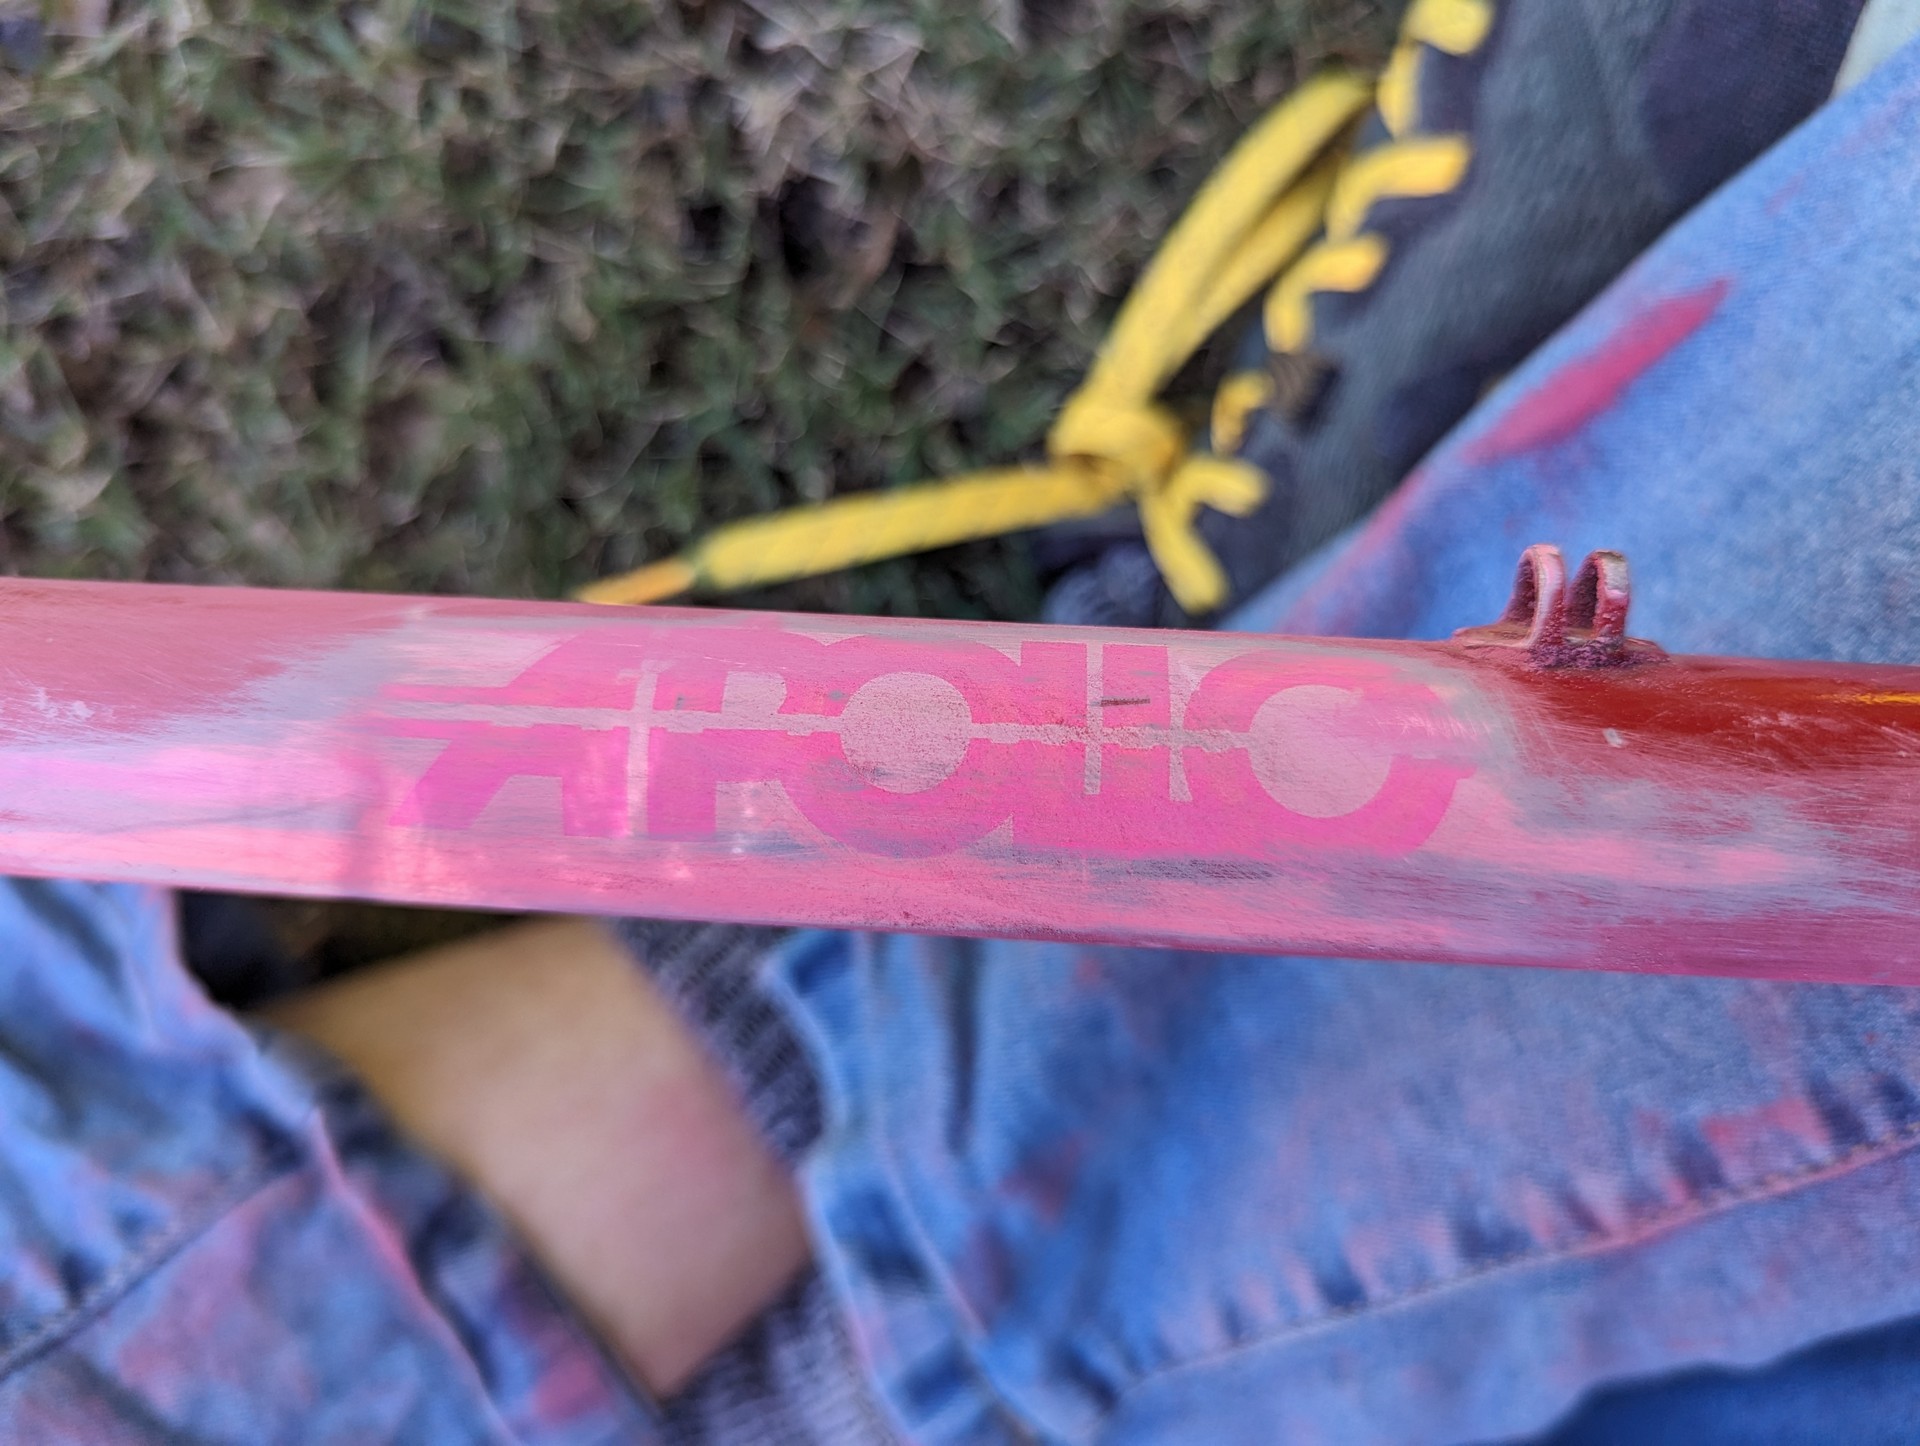 Sanded back paint revealing pink apollo logo